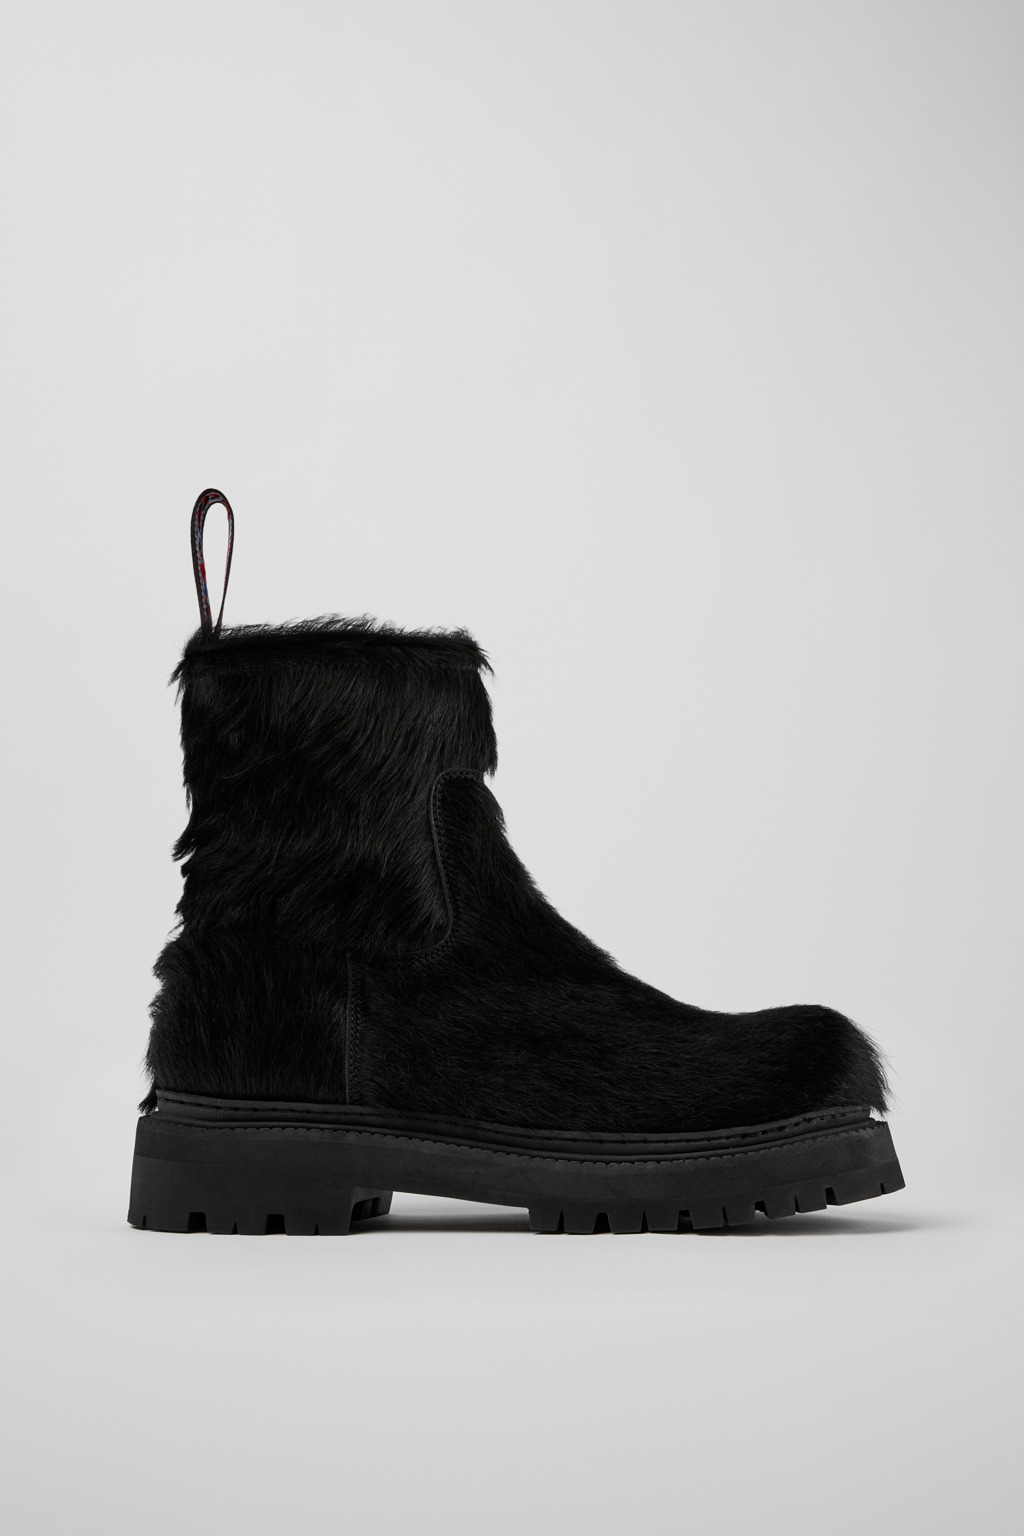 EKI Black Boots for Unisex - Fall/Winter collection - Camper USA